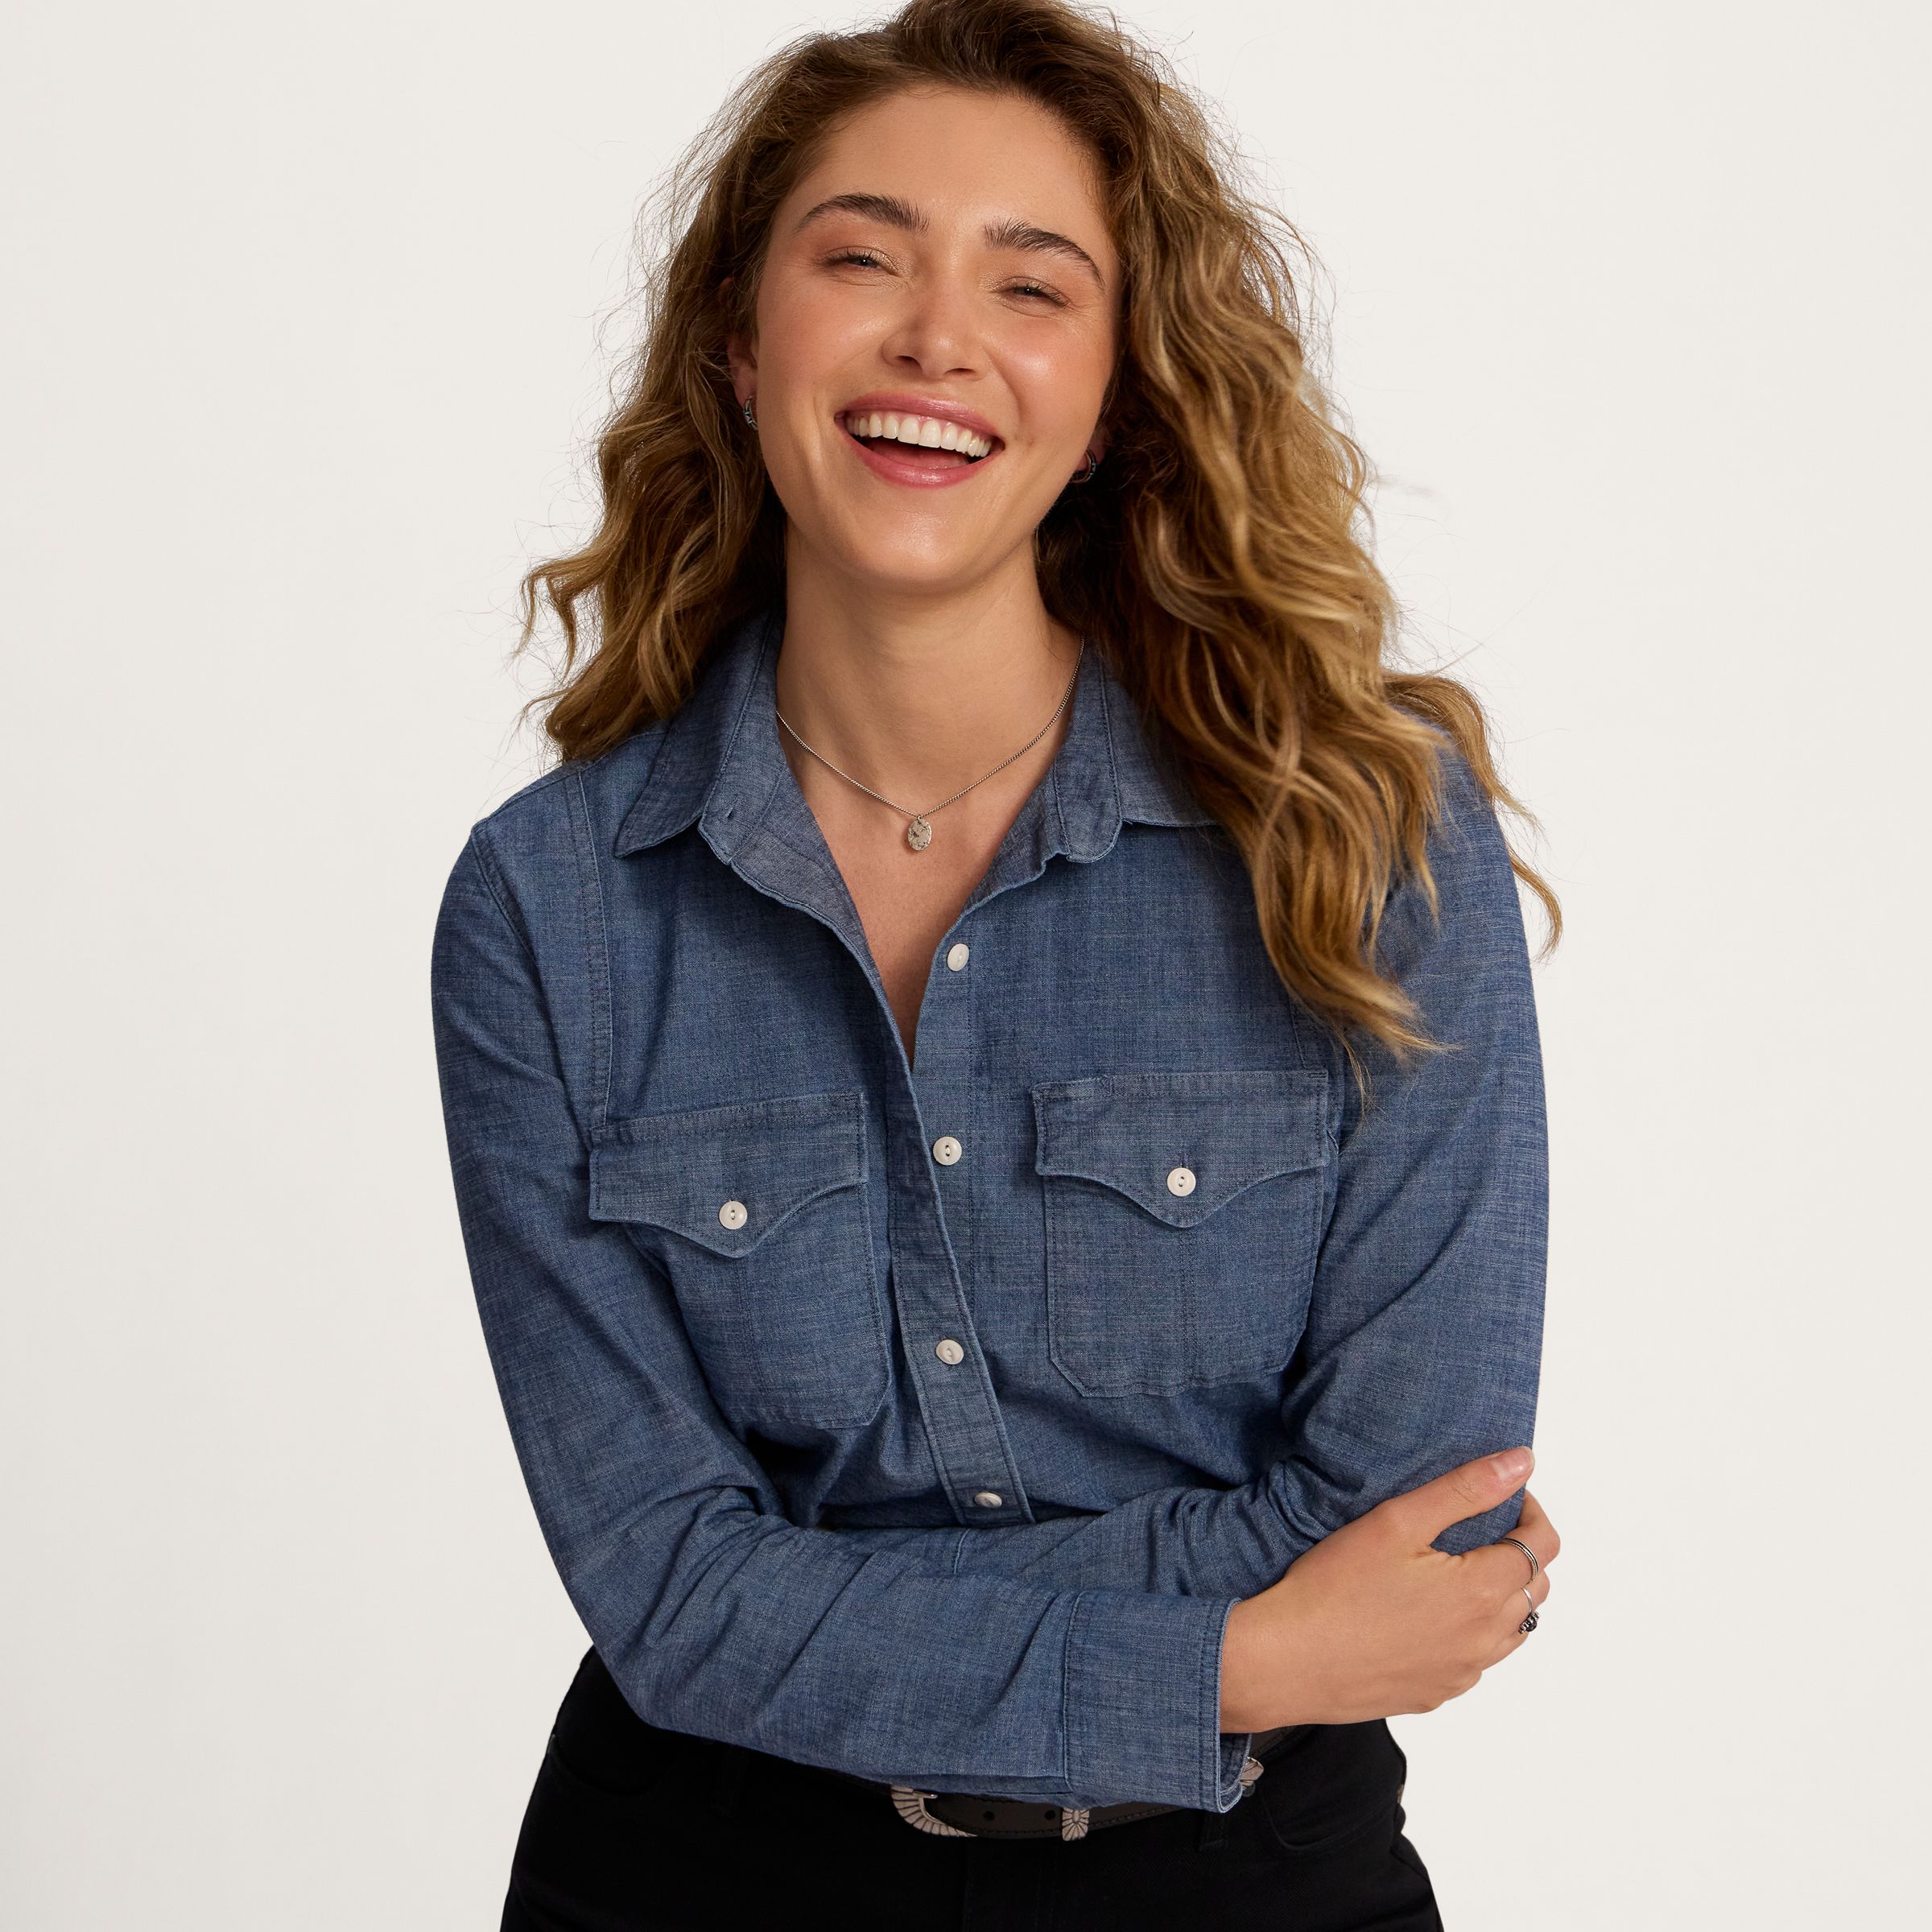 Dr Denim shirt with long sleeves in navy check | ASOS